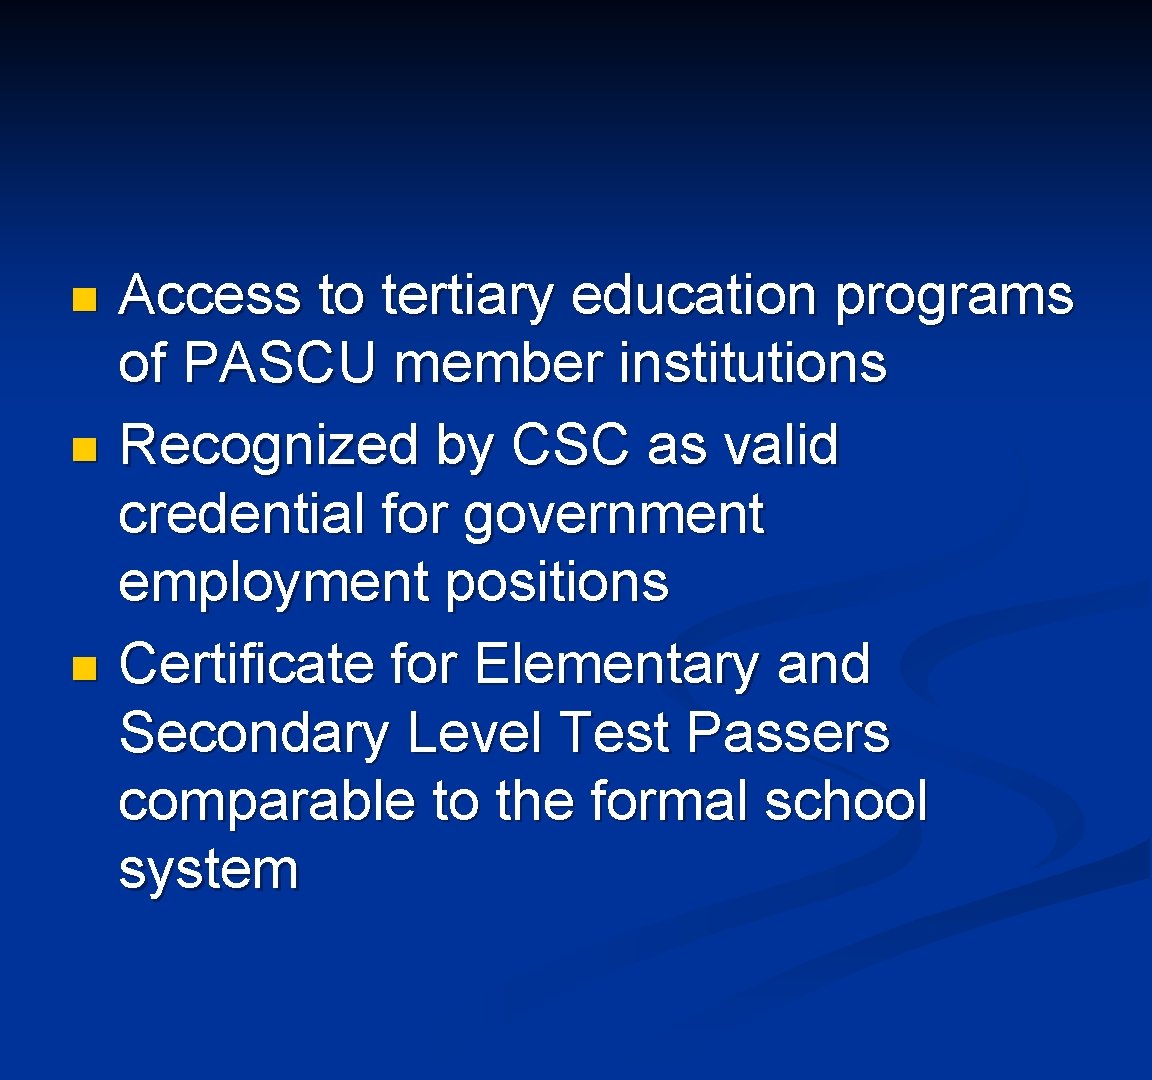 Access to tertiary education programs of PASCU member institutions n Recognized by CSC as